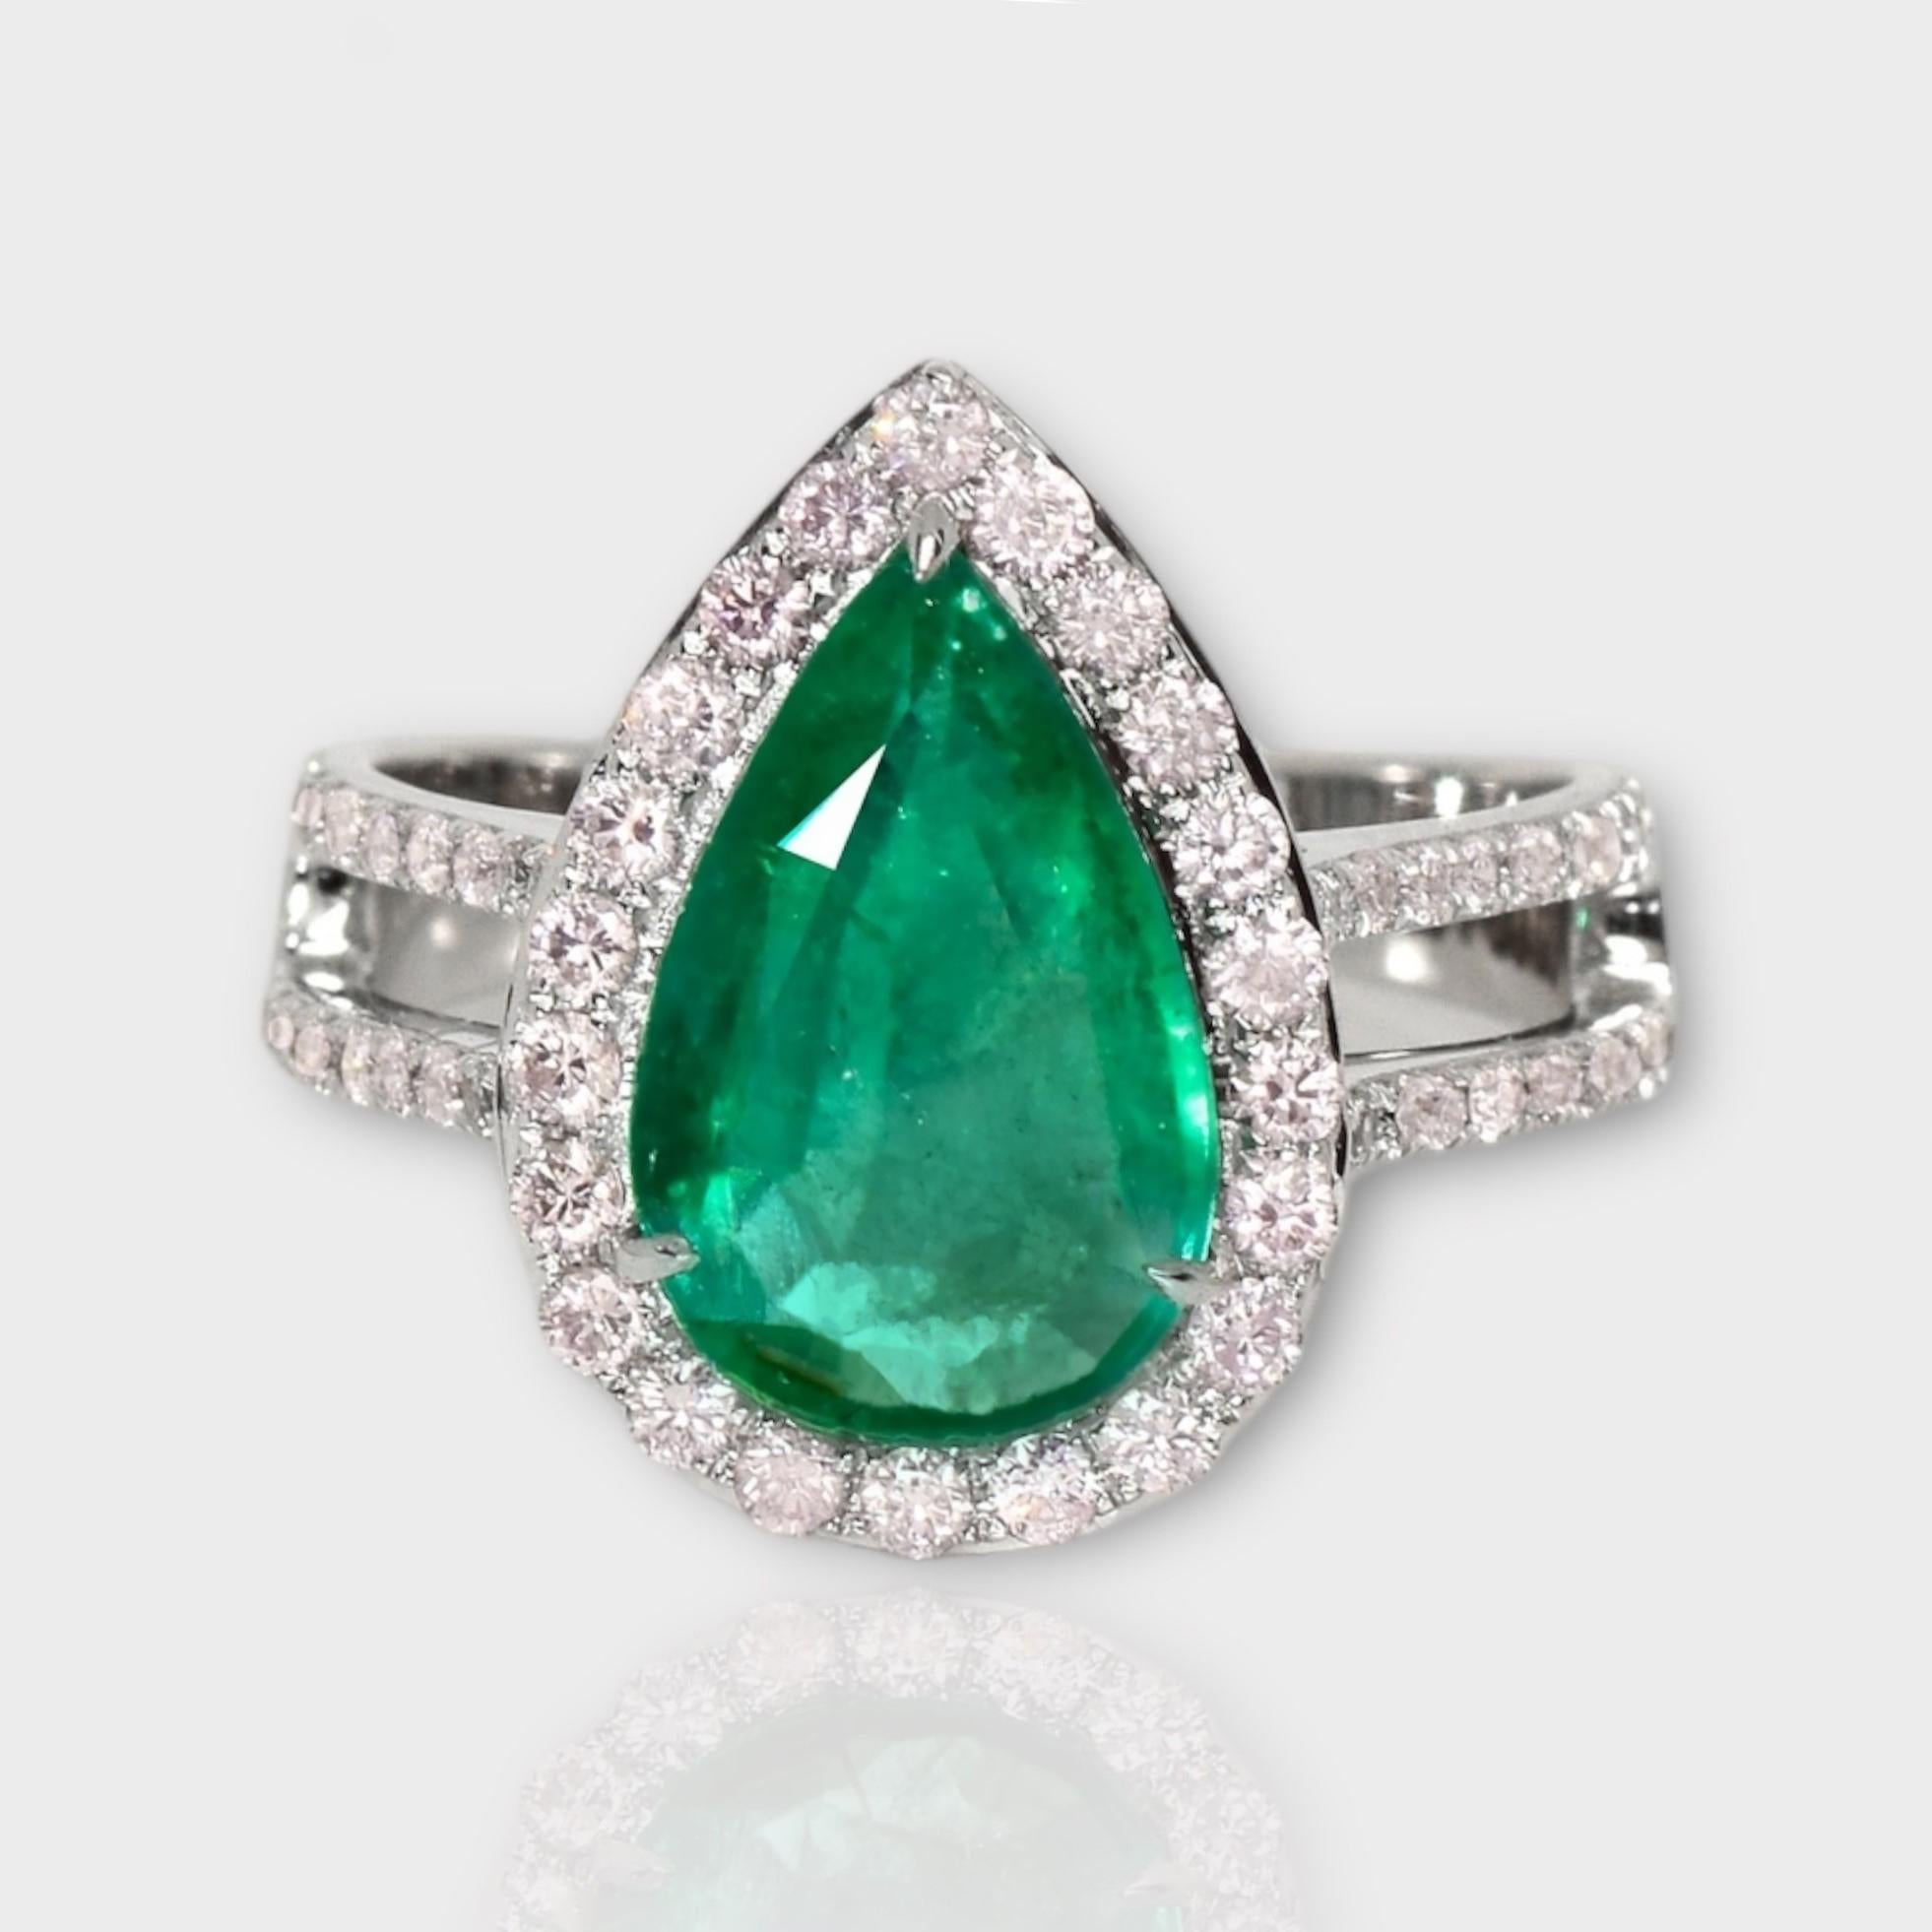 **IGI 18K White Gold 2.25 ct Emerald&Pink Diamonds Antique Art Deco Style Engagement Ring** 

An IGI-certified natural Zambia green emerald weighing 2.25 ct is set on an 18K white gold arc deco design band with natural pink diamonds weighing 0.66